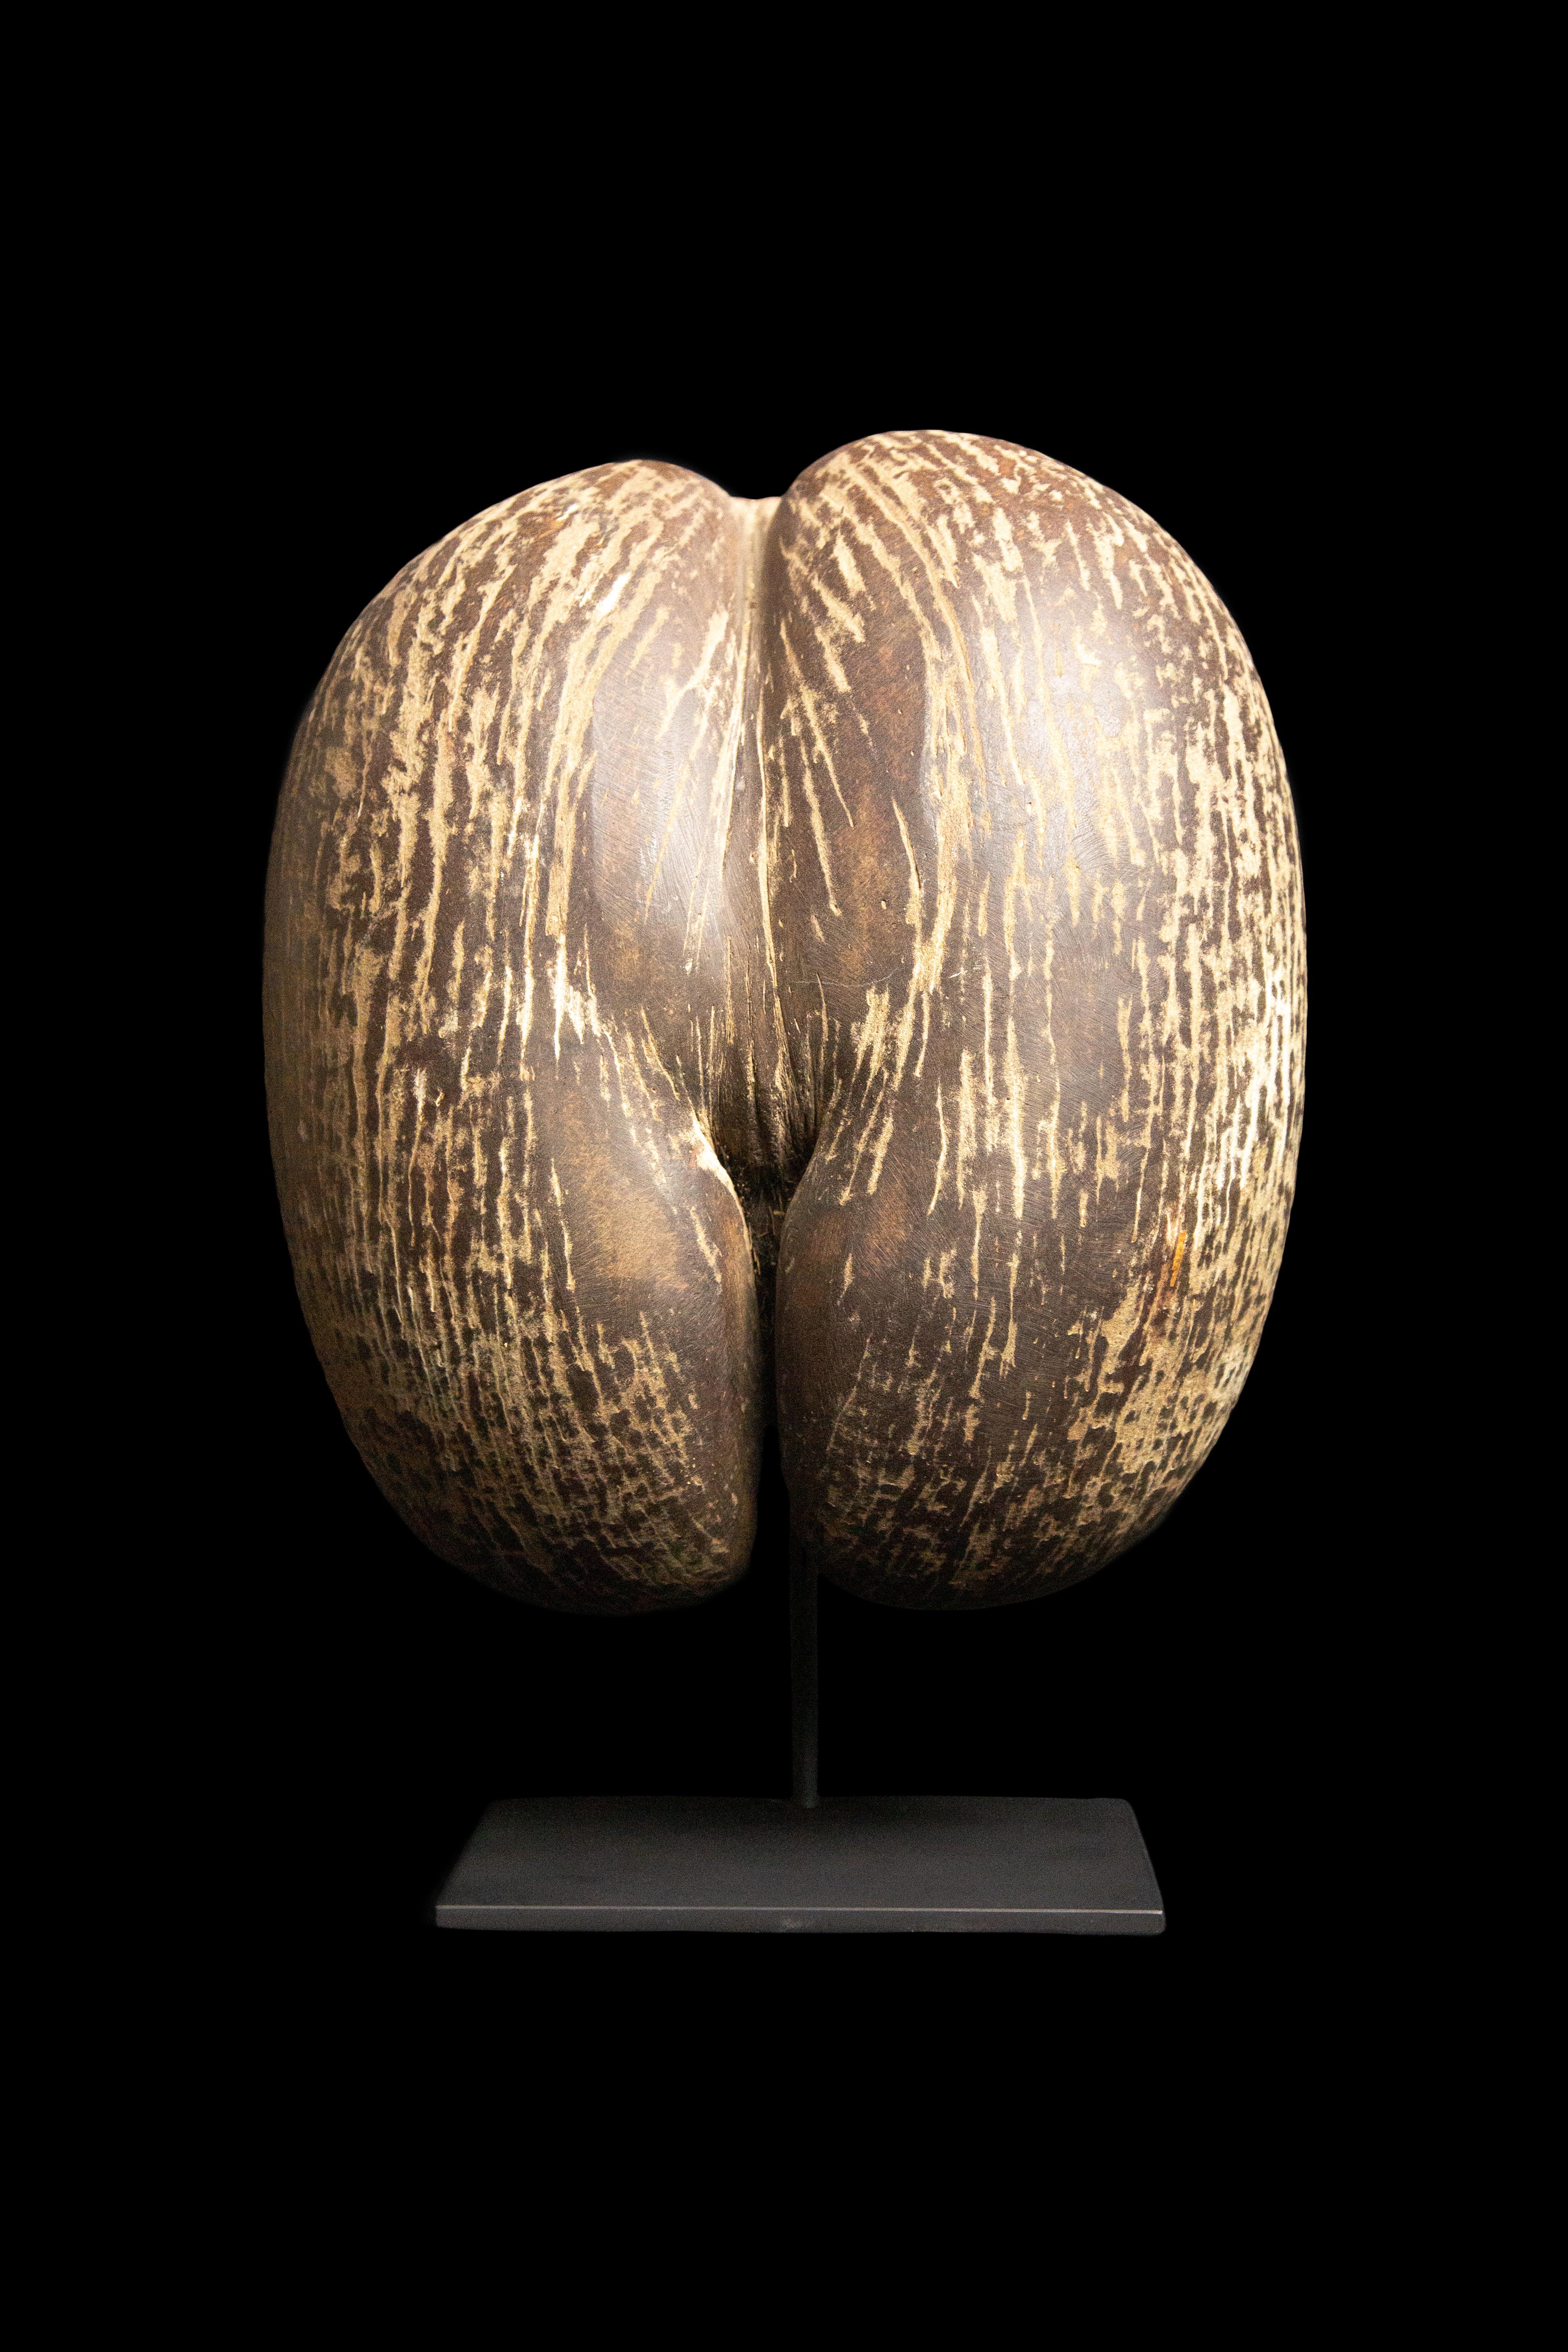 Coco De Mer:

The nut and tree of the coco de mer is a rare species of palm tree native to Africa, in the Seychelles archipelago in the Indian Ocean. It is the subject of various legends and lore. Coco de mer is endemic to the Seychelles islands